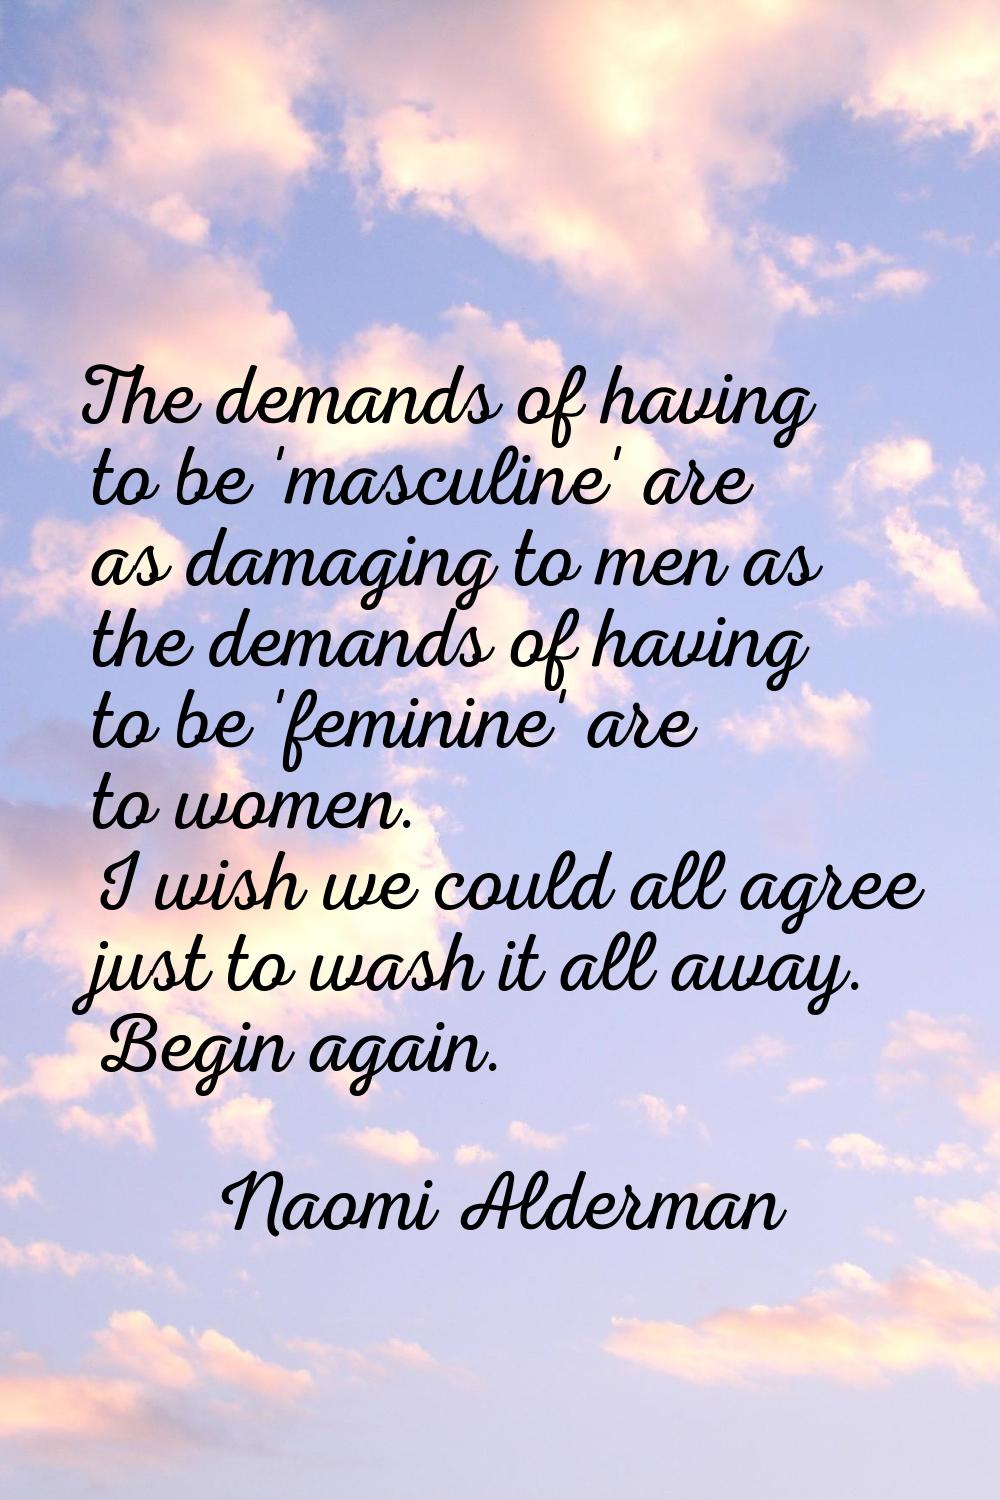 The demands of having to be 'masculine' are as damaging to men as the demands of having to be 'femi